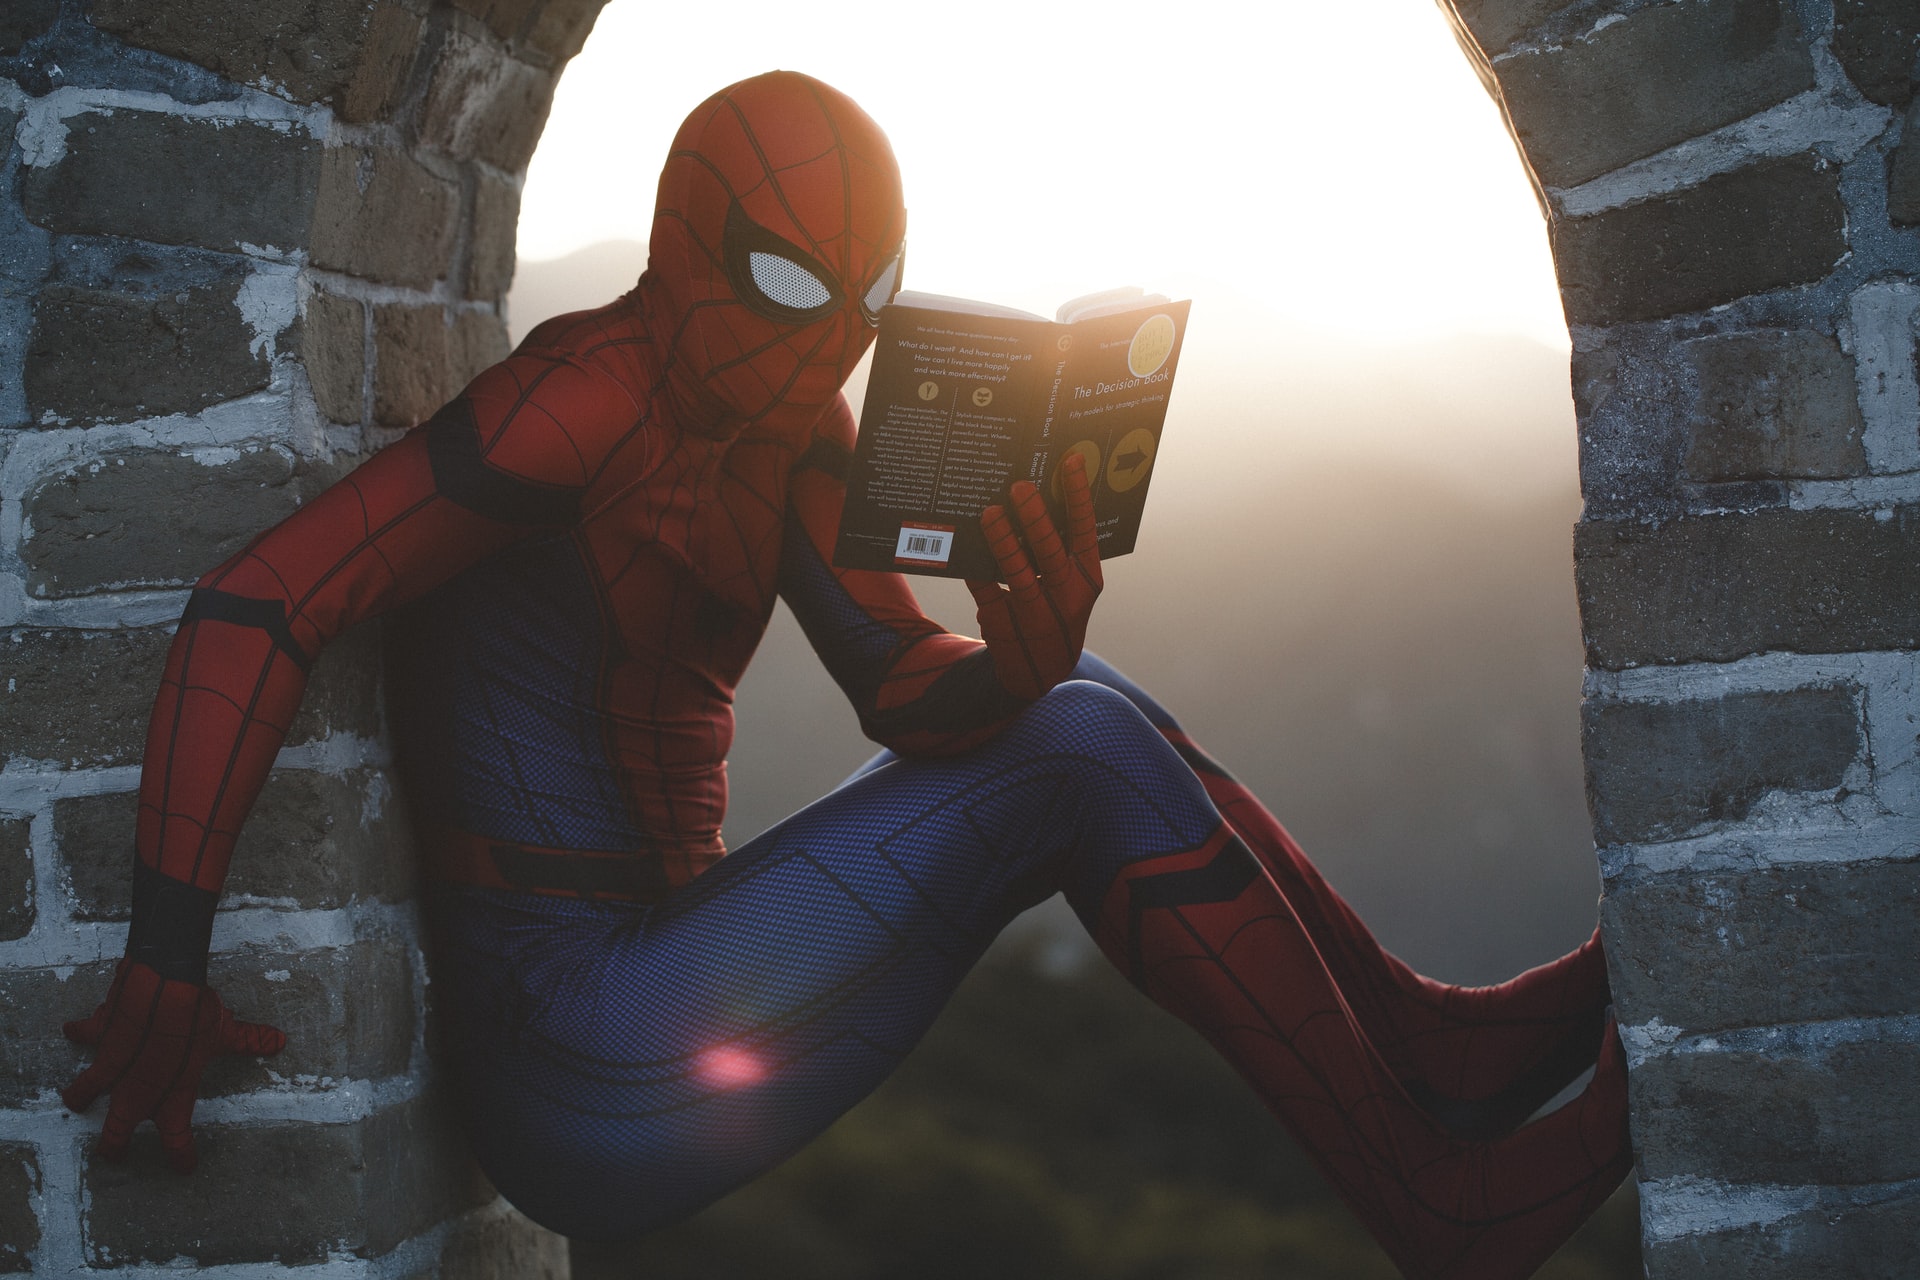 Spiderman sitting high up reading a book